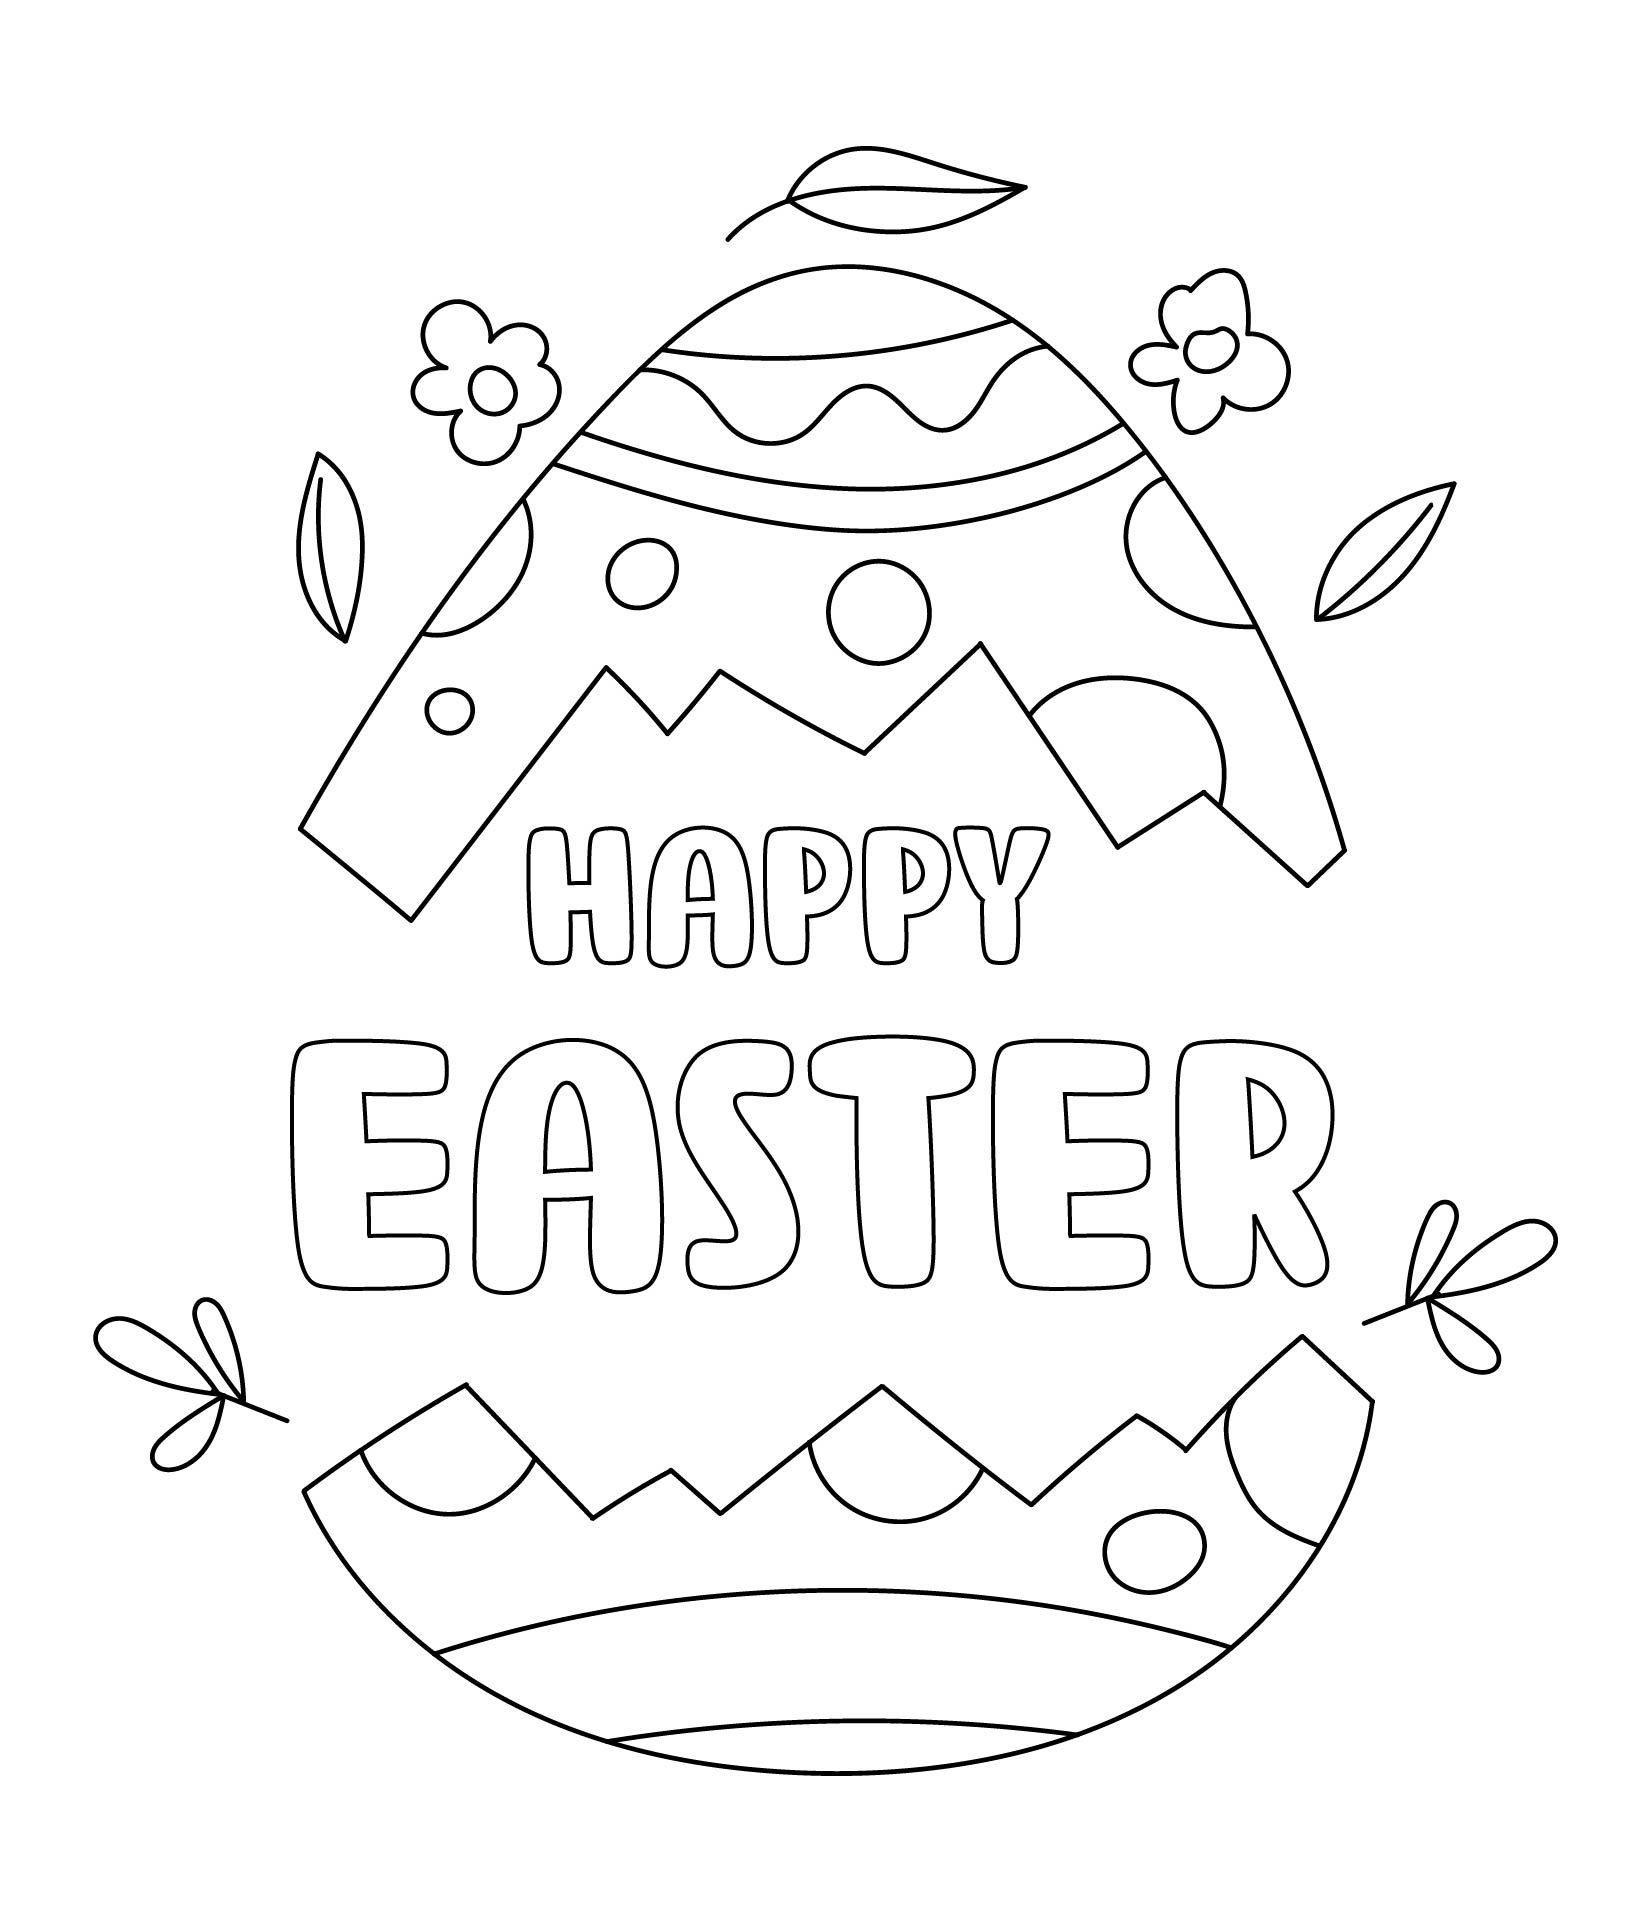 Happy Easter Coloring Pages to Print